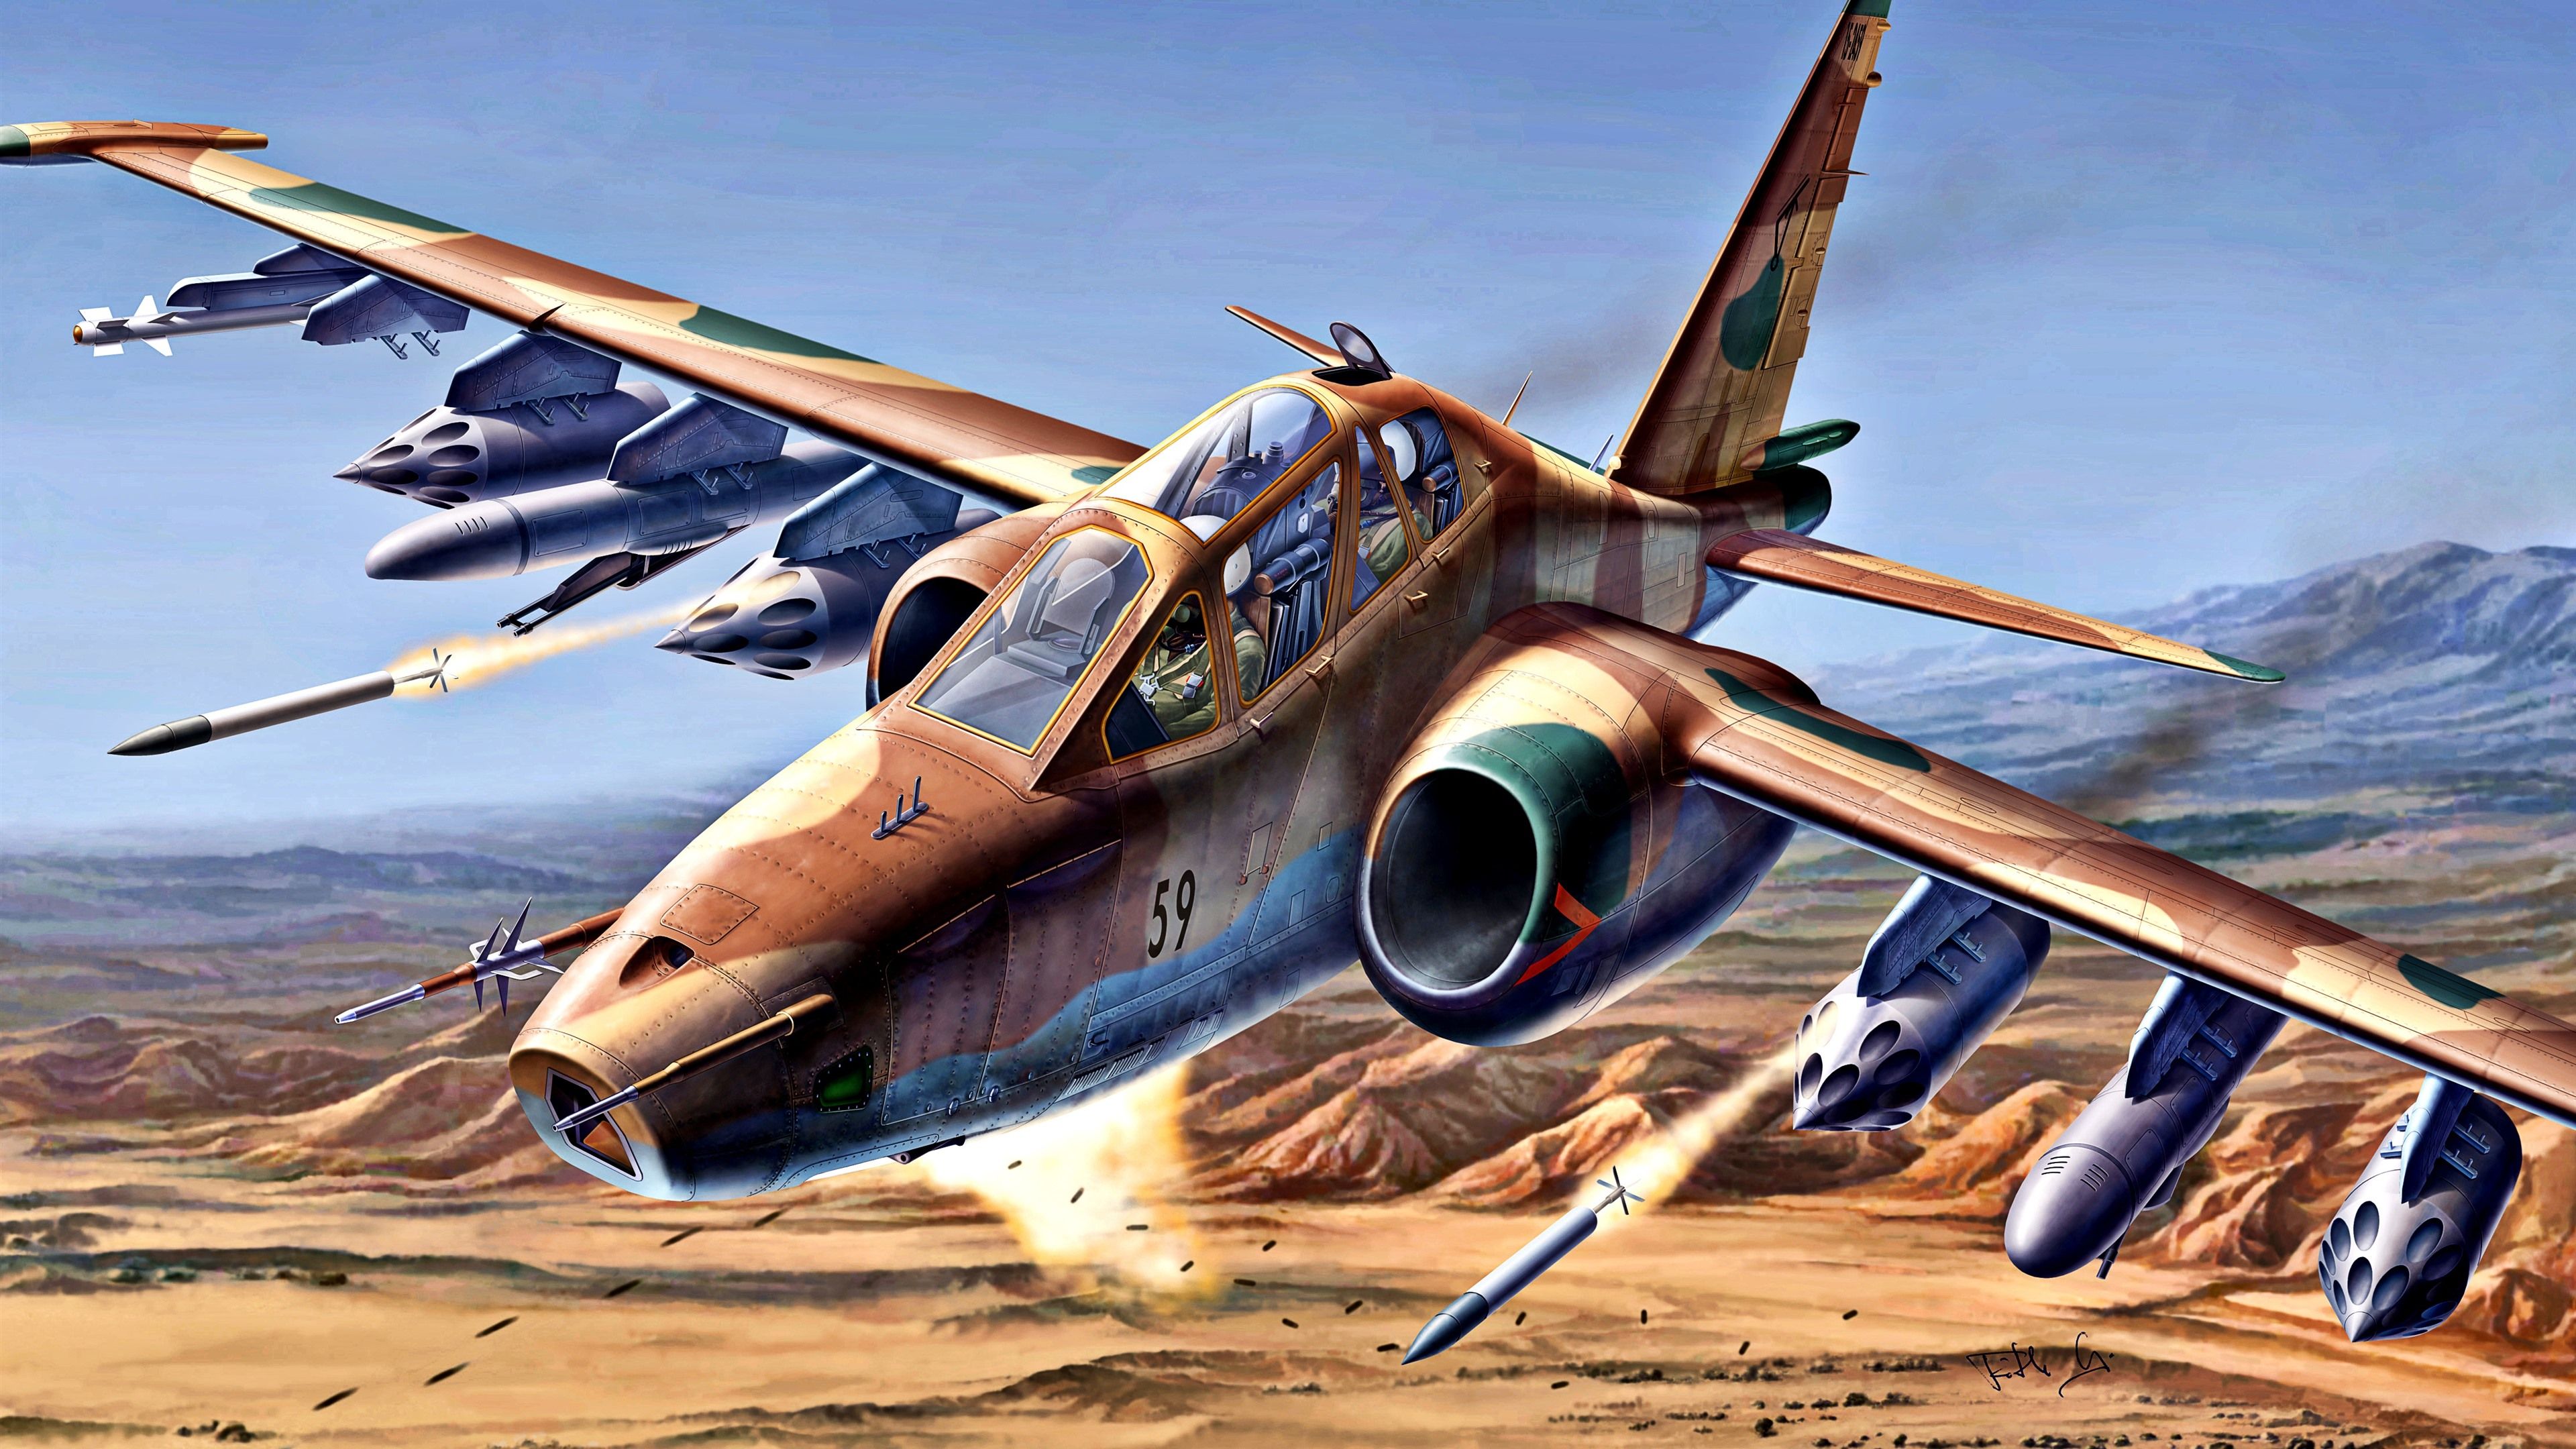 Wallpaper Su 25 Military Aircraft, Art Painting 3840x2160 UHD 4K Picture, Image